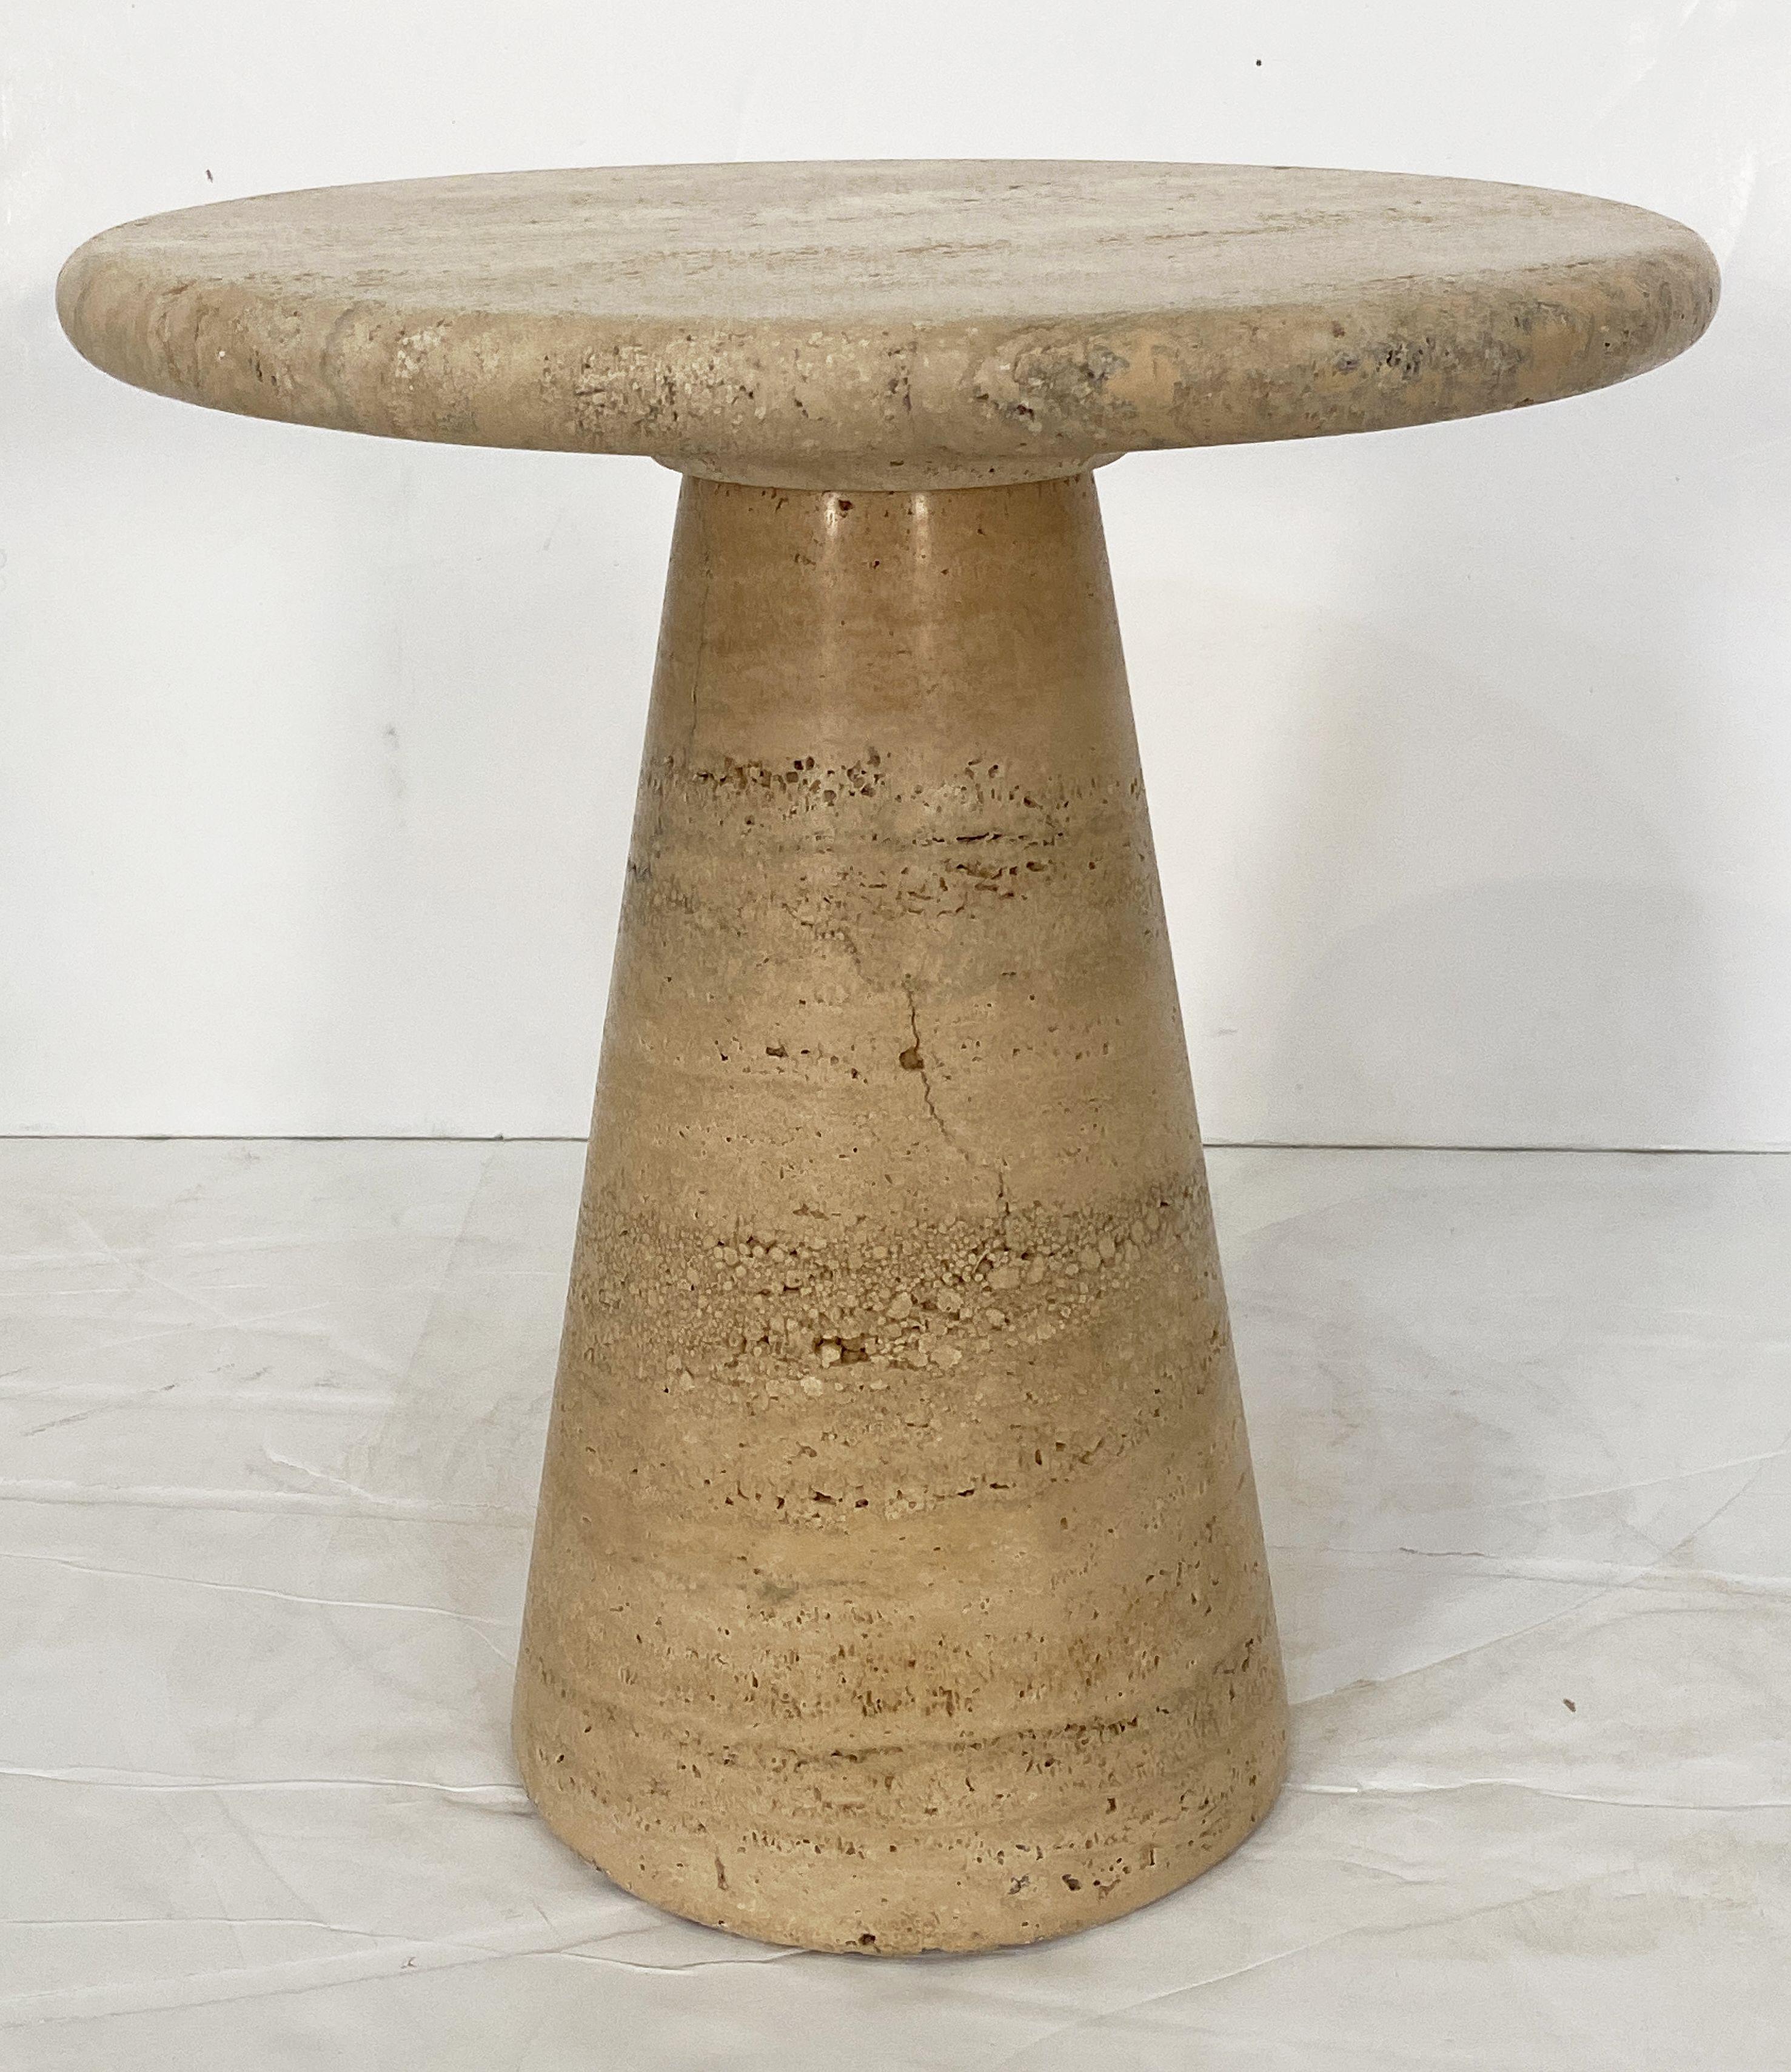 Modernist Conical Table of Travertine Stone from Italy (Four Available) In Good Condition For Sale In Austin, TX